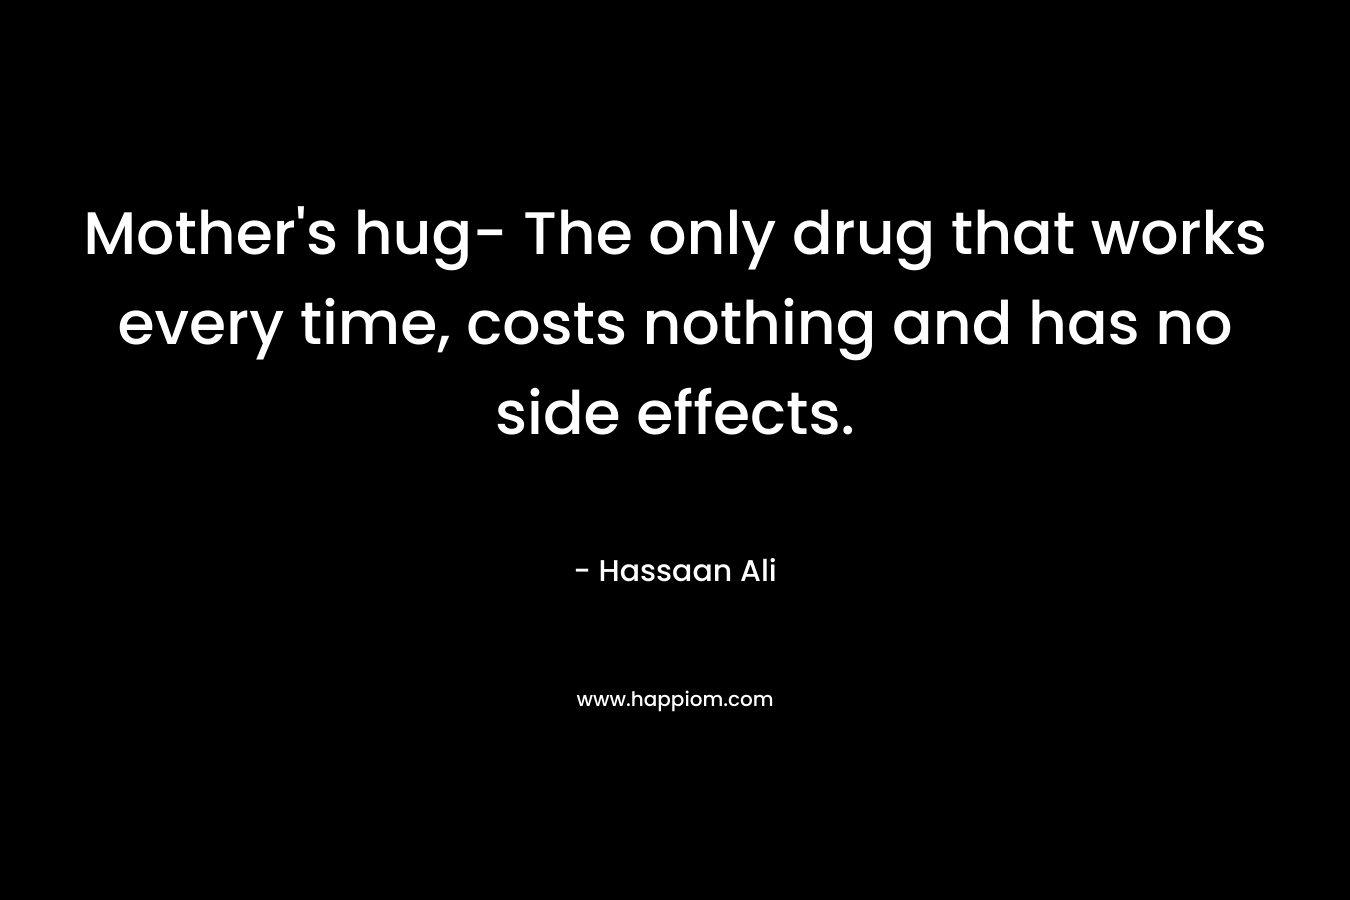 Mother’s hug- The only drug that works every time, costs nothing and has no side effects. – Hassaan Ali